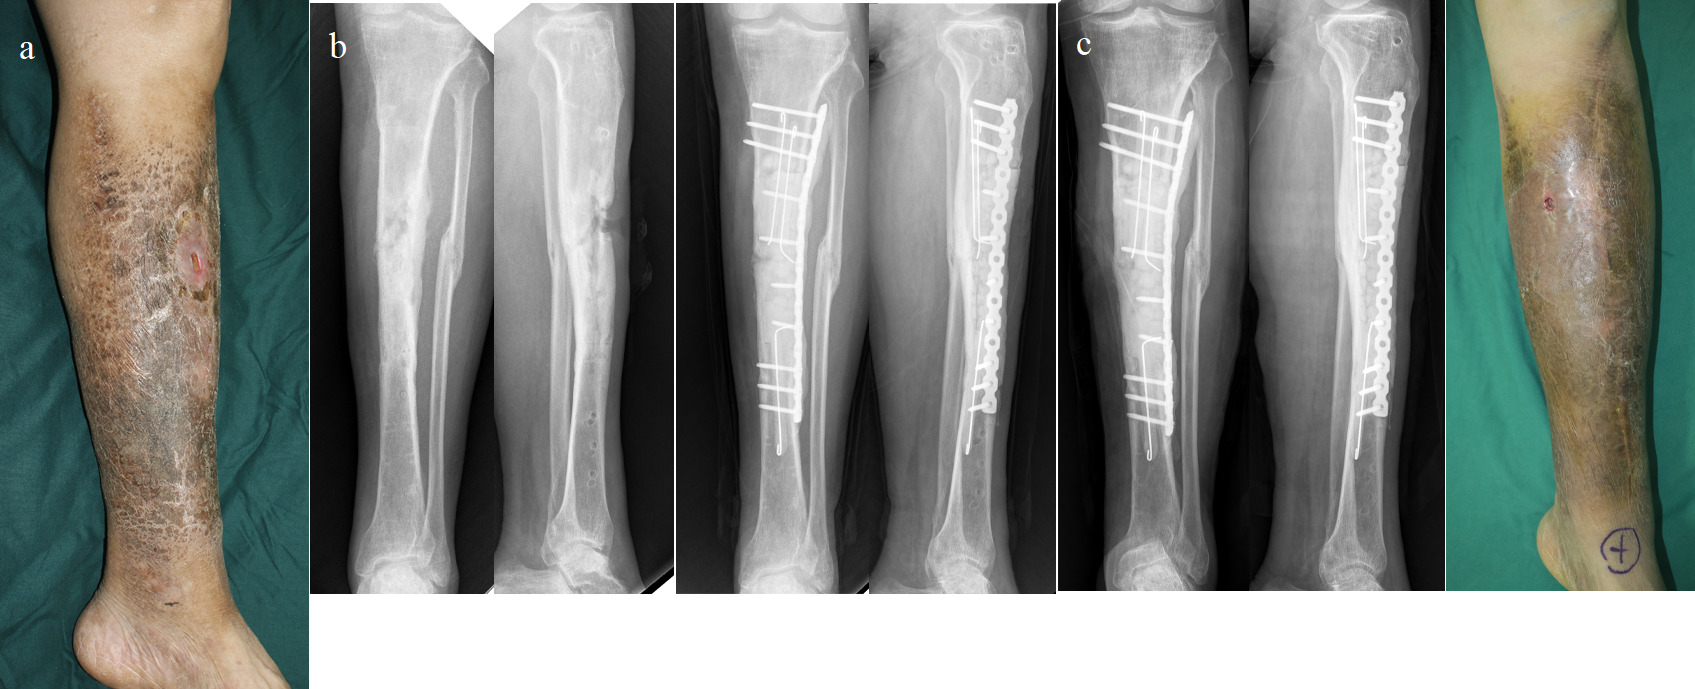 Fig. 3 
            Recurrent osteomyelitis patient (56 years old, male) with Pseudomonas aeruginosa infection in tibia shaft, who chose an antibiotic‐loaded cement spacer (ALCS) for definitive treatment. a) Photograph presenting a sinus in midshaft, anterior side of the tibia. b) Anteroposterior (AP) and lateral radiographs before and after operation of debridement and placing an ALCS for dead space. c) Radiographs (AP and lateral) and photograph showing a sign of recurrence at 13 months, where the sinus occured in a previous site.
          